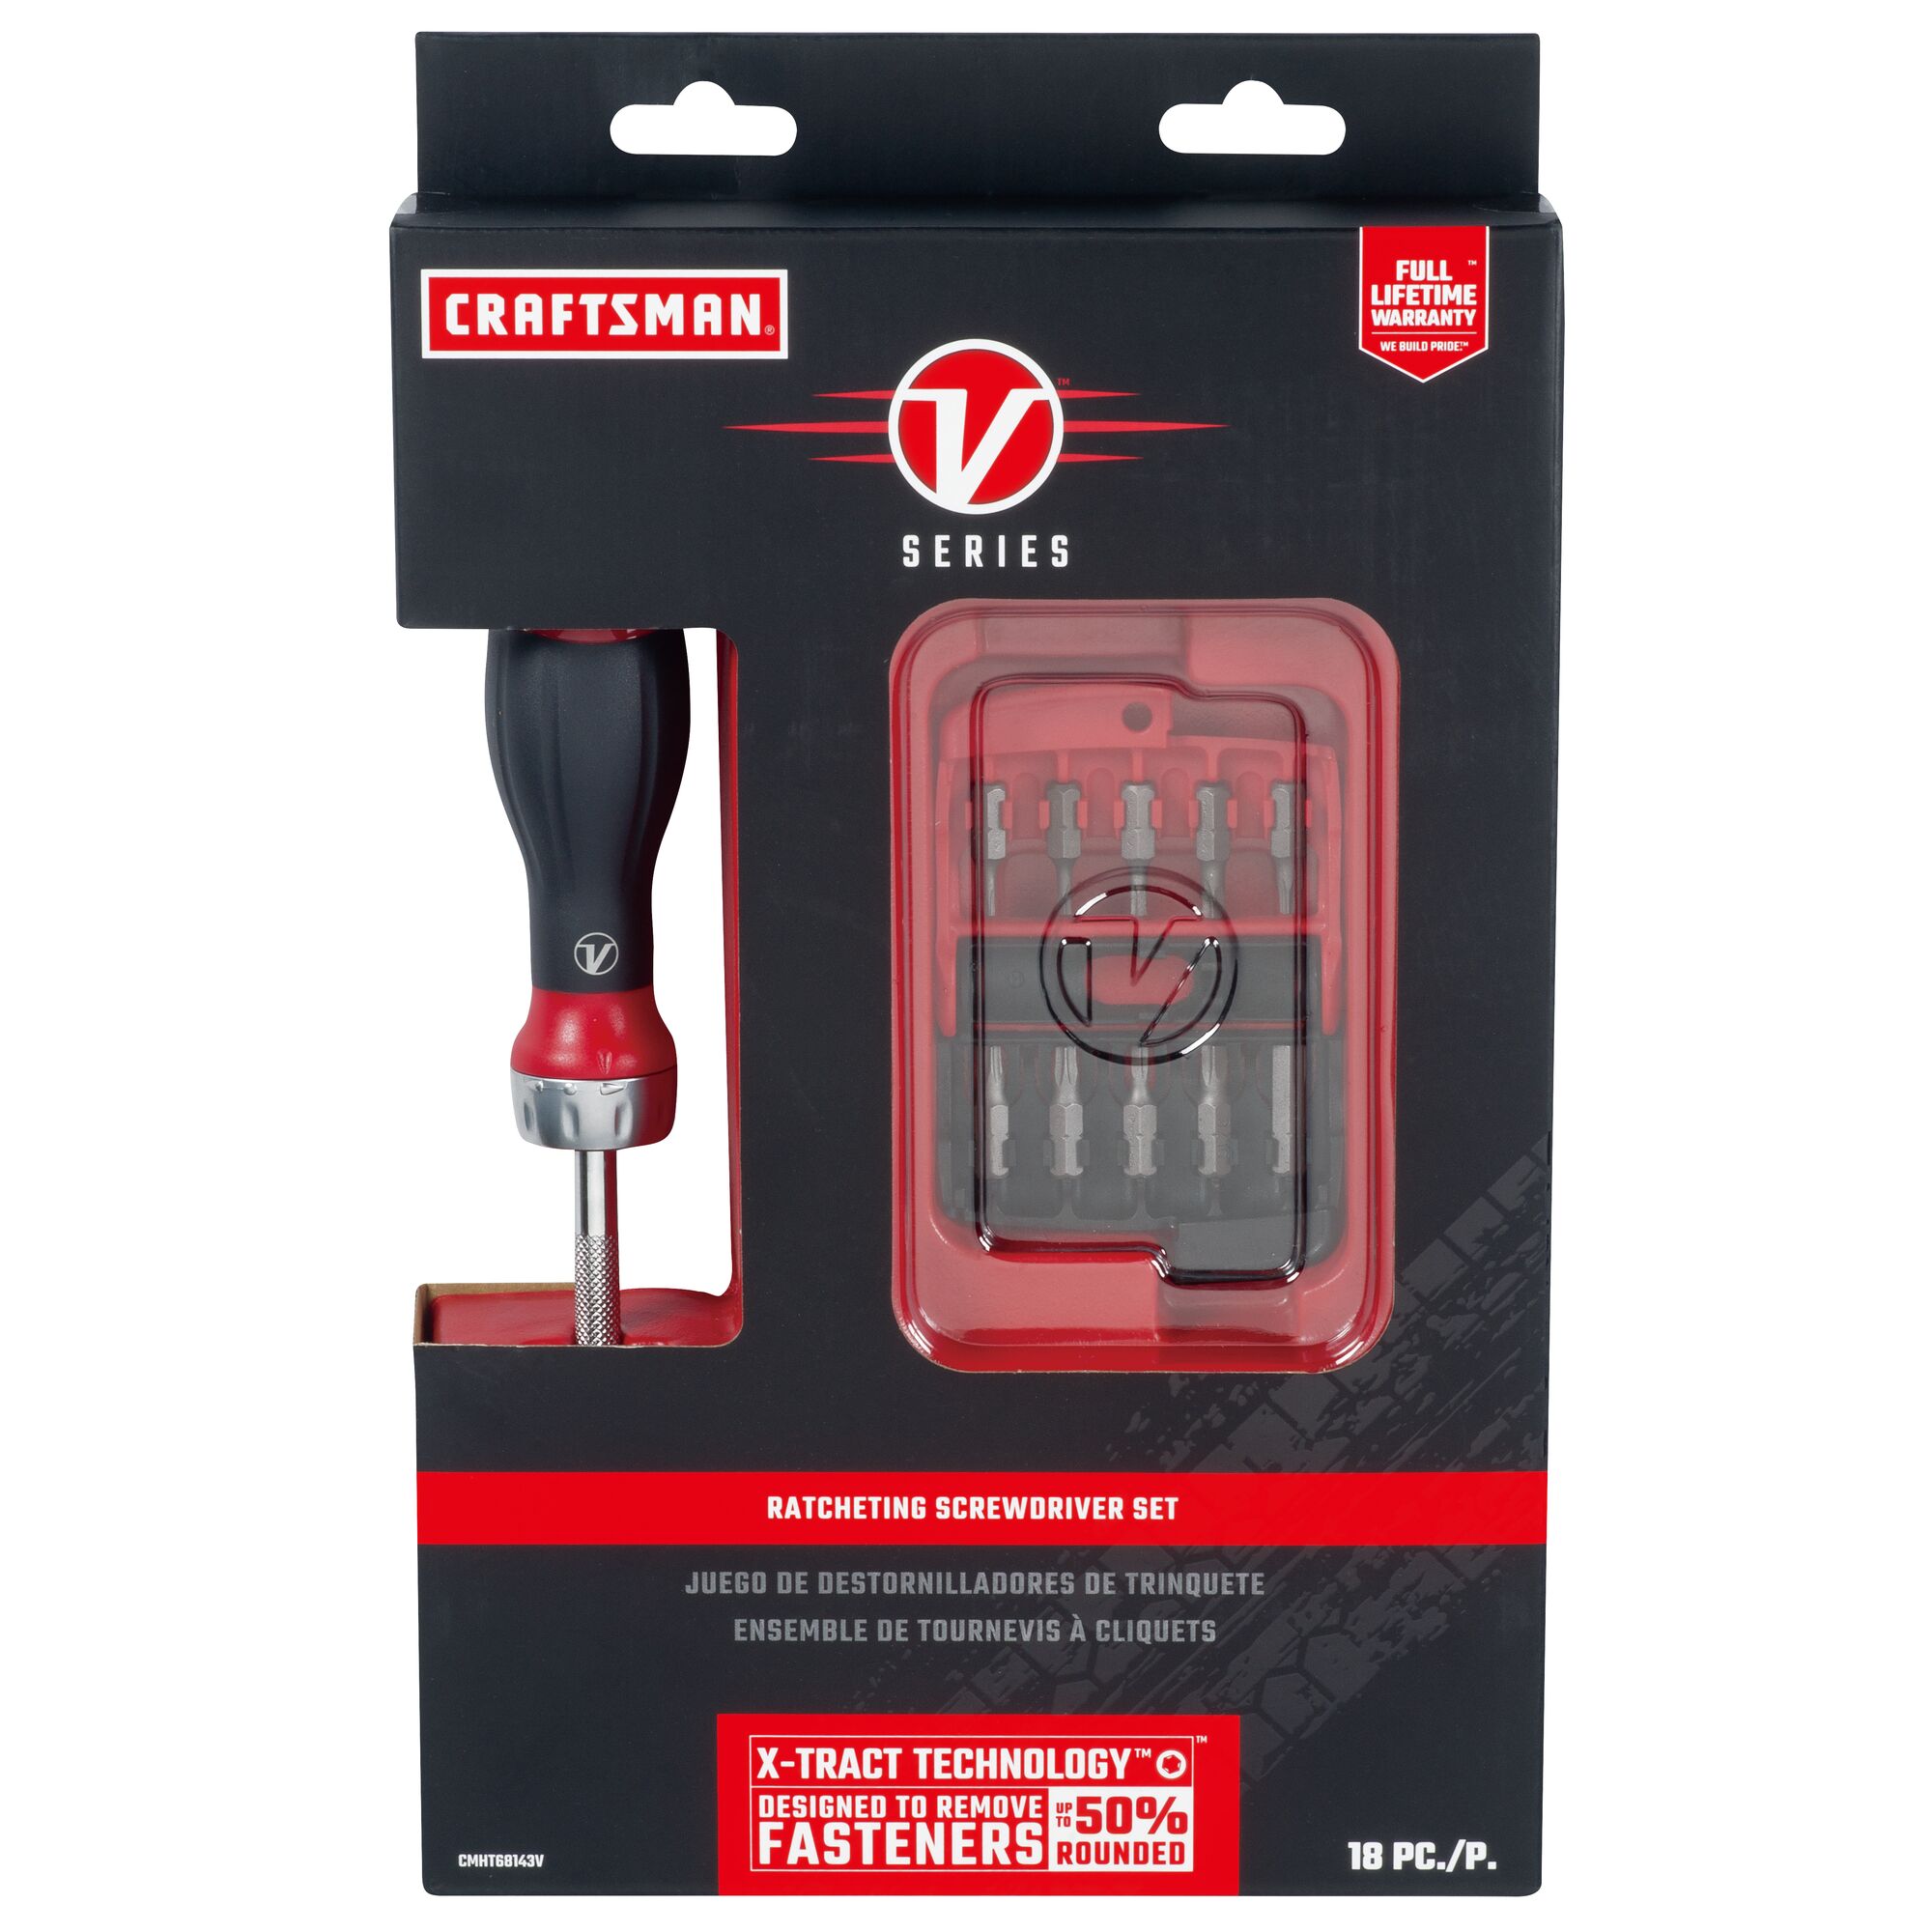 V Series 18 piece Ratcheting ScrewDriver X Tract Technology Bit Set in card box packaging.